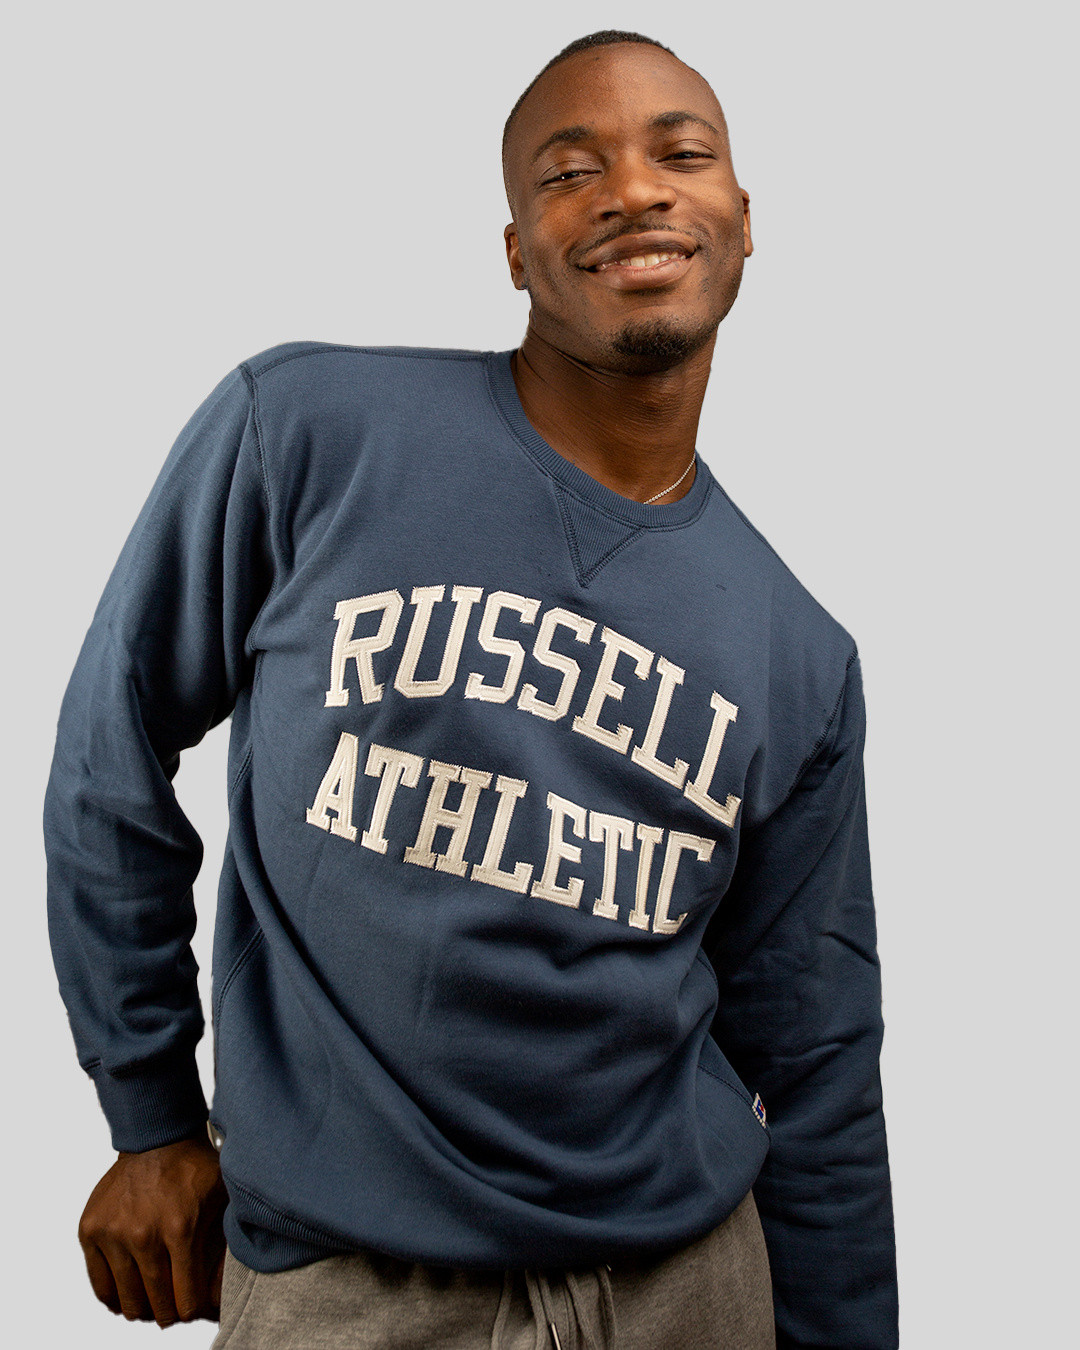 Russell Athletic - Sweatshirt with embroidery, Blue, large image number 2